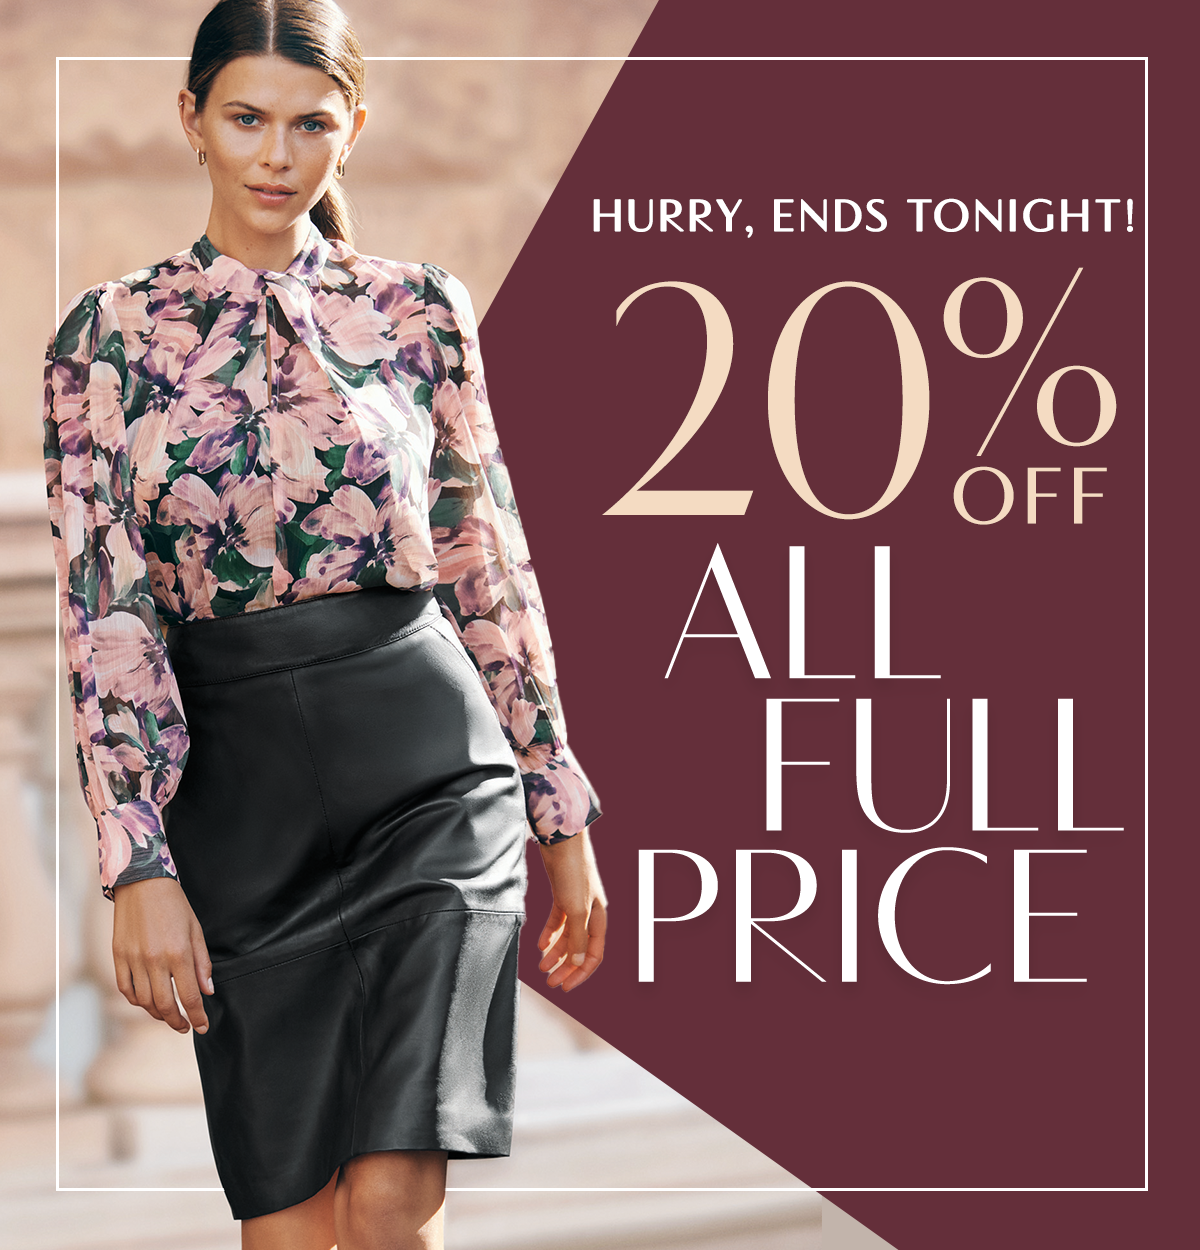 20% Off All Full Price. 850+ Styles. Ends Monday.